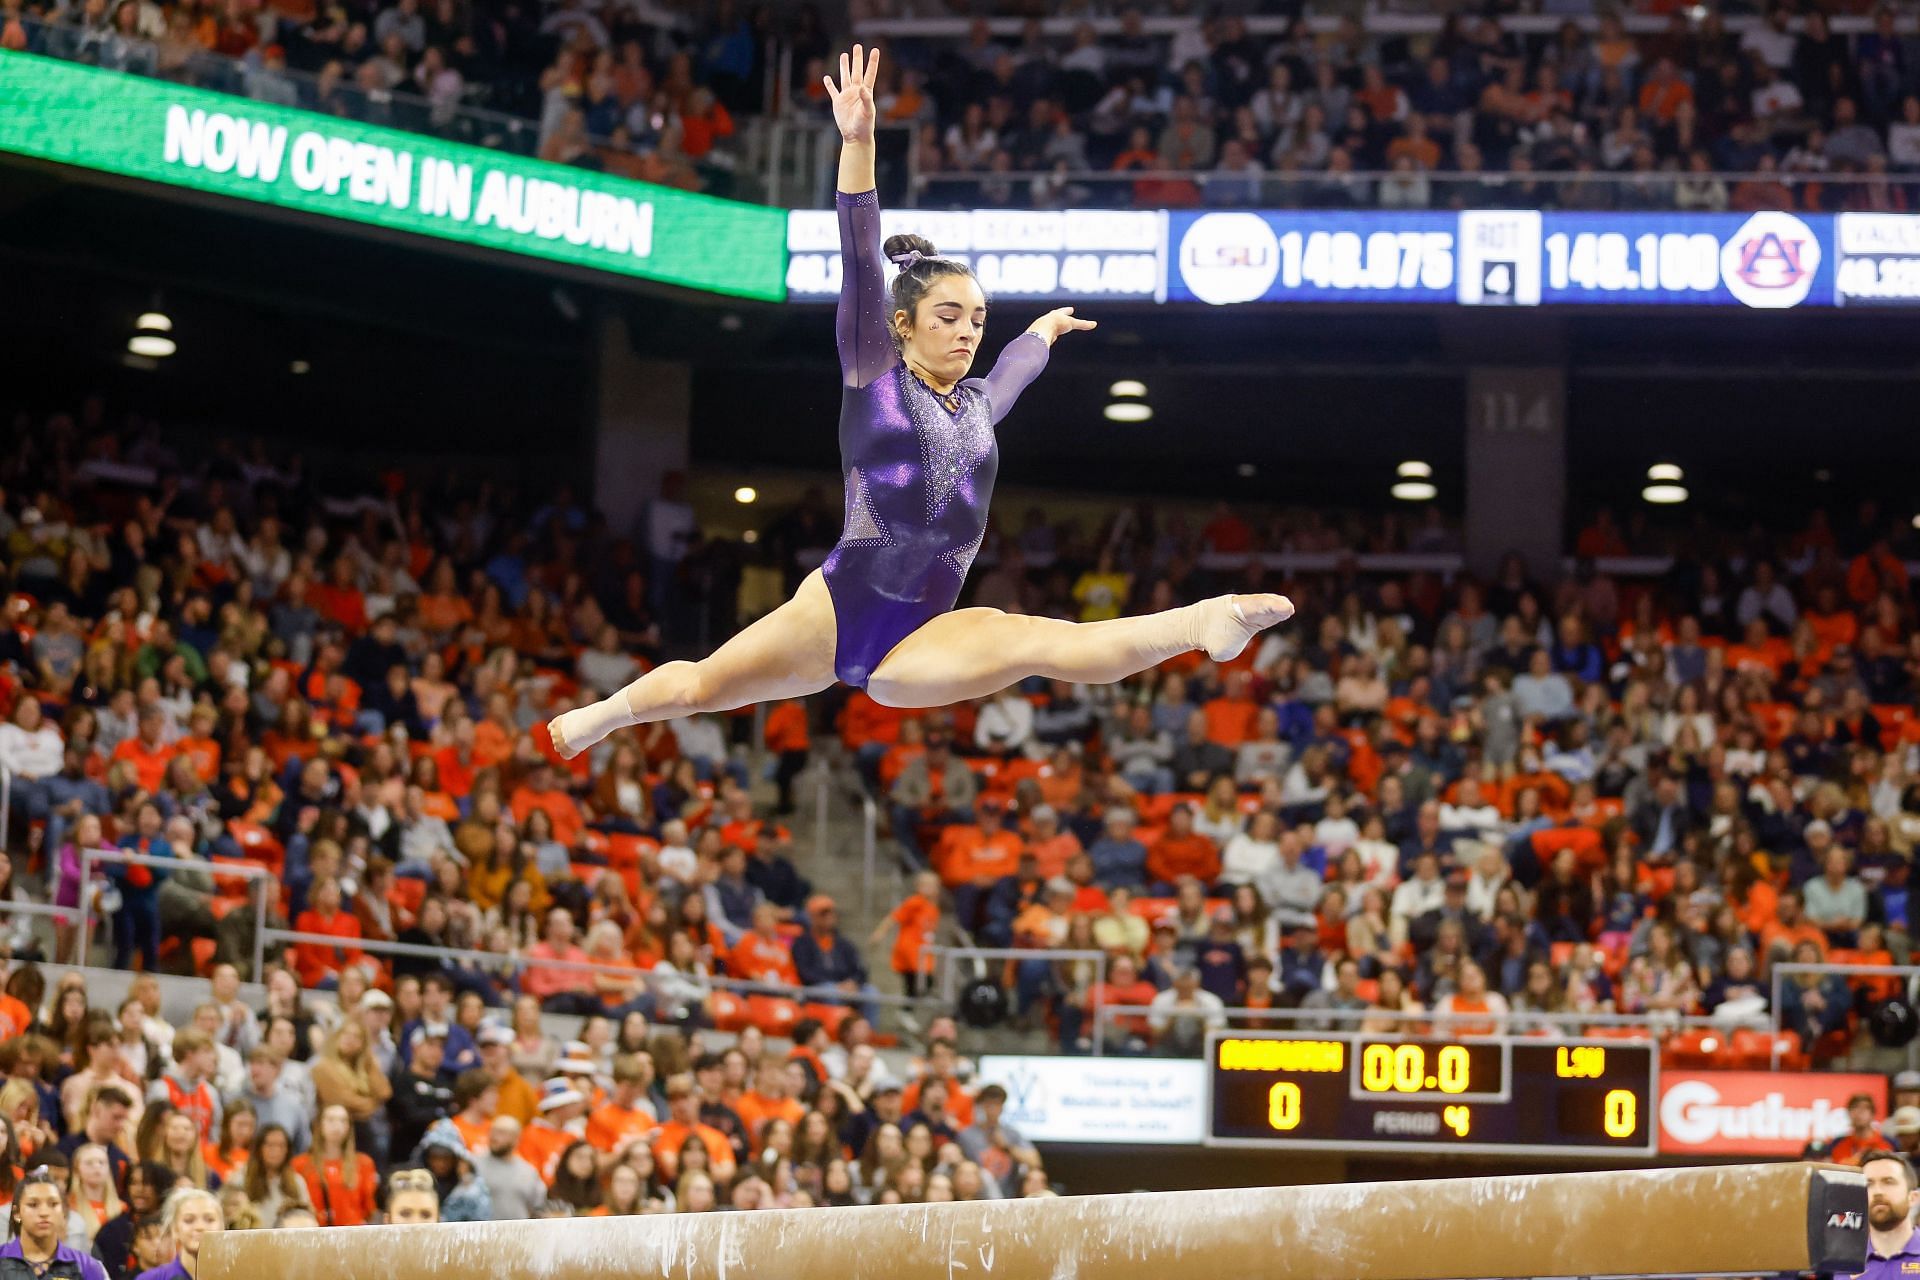 Elena Arenas of LSU competes on the balance beam during a gymnastics meet against Auburn at Neville Arena in February 2023 in Auburn, Alabama.